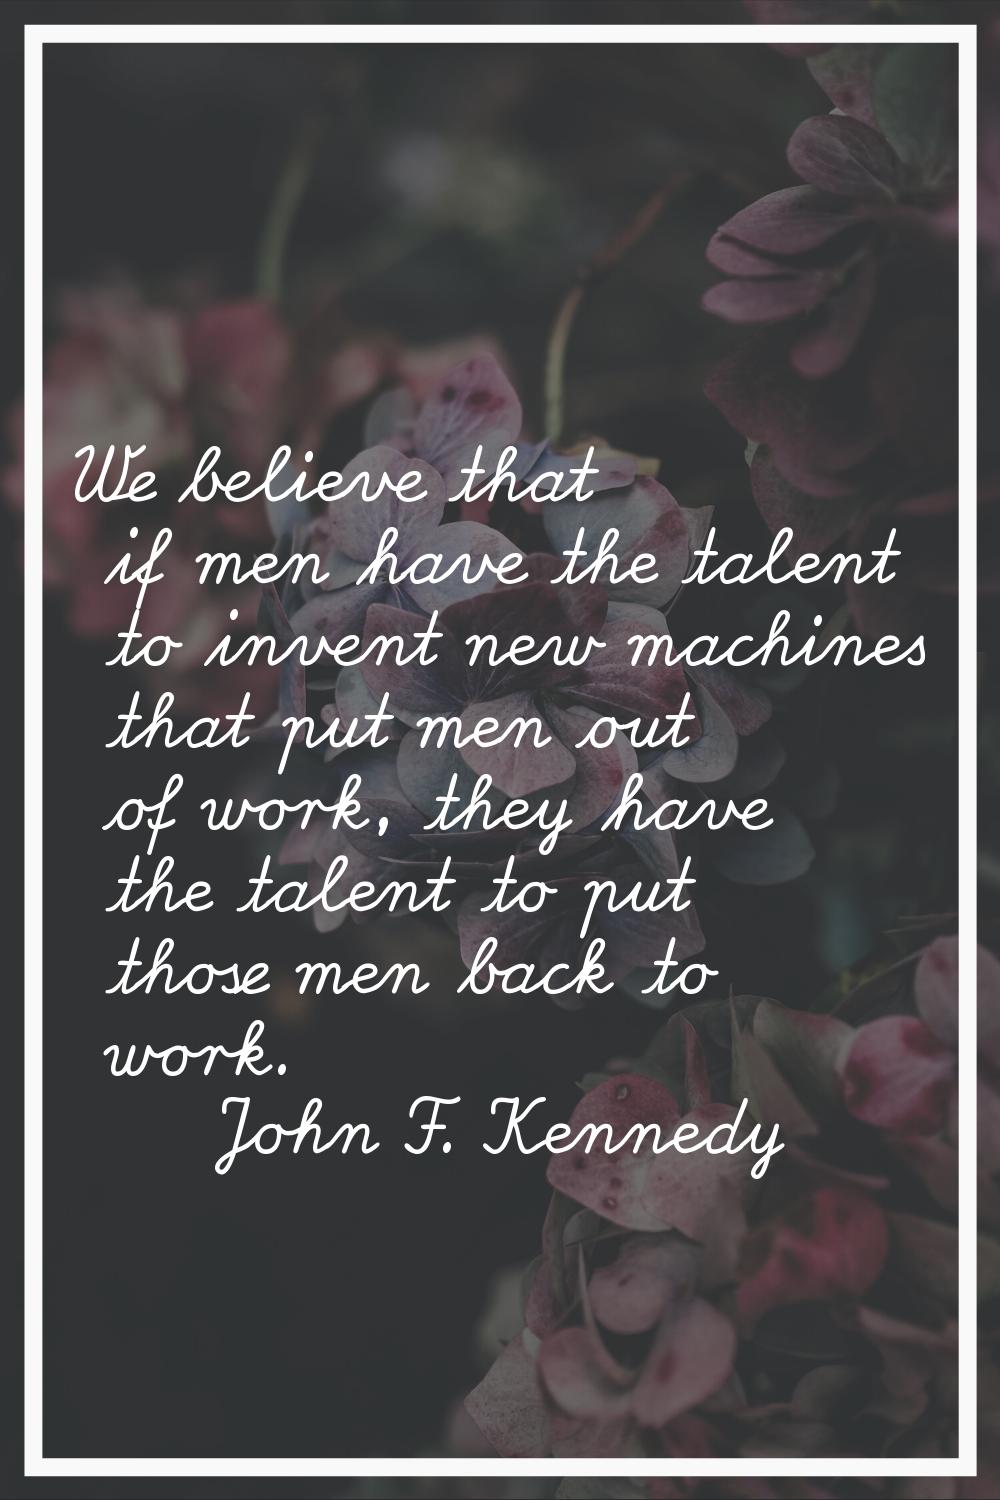 We believe that if men have the talent to invent new machines that put men out of work, they have t